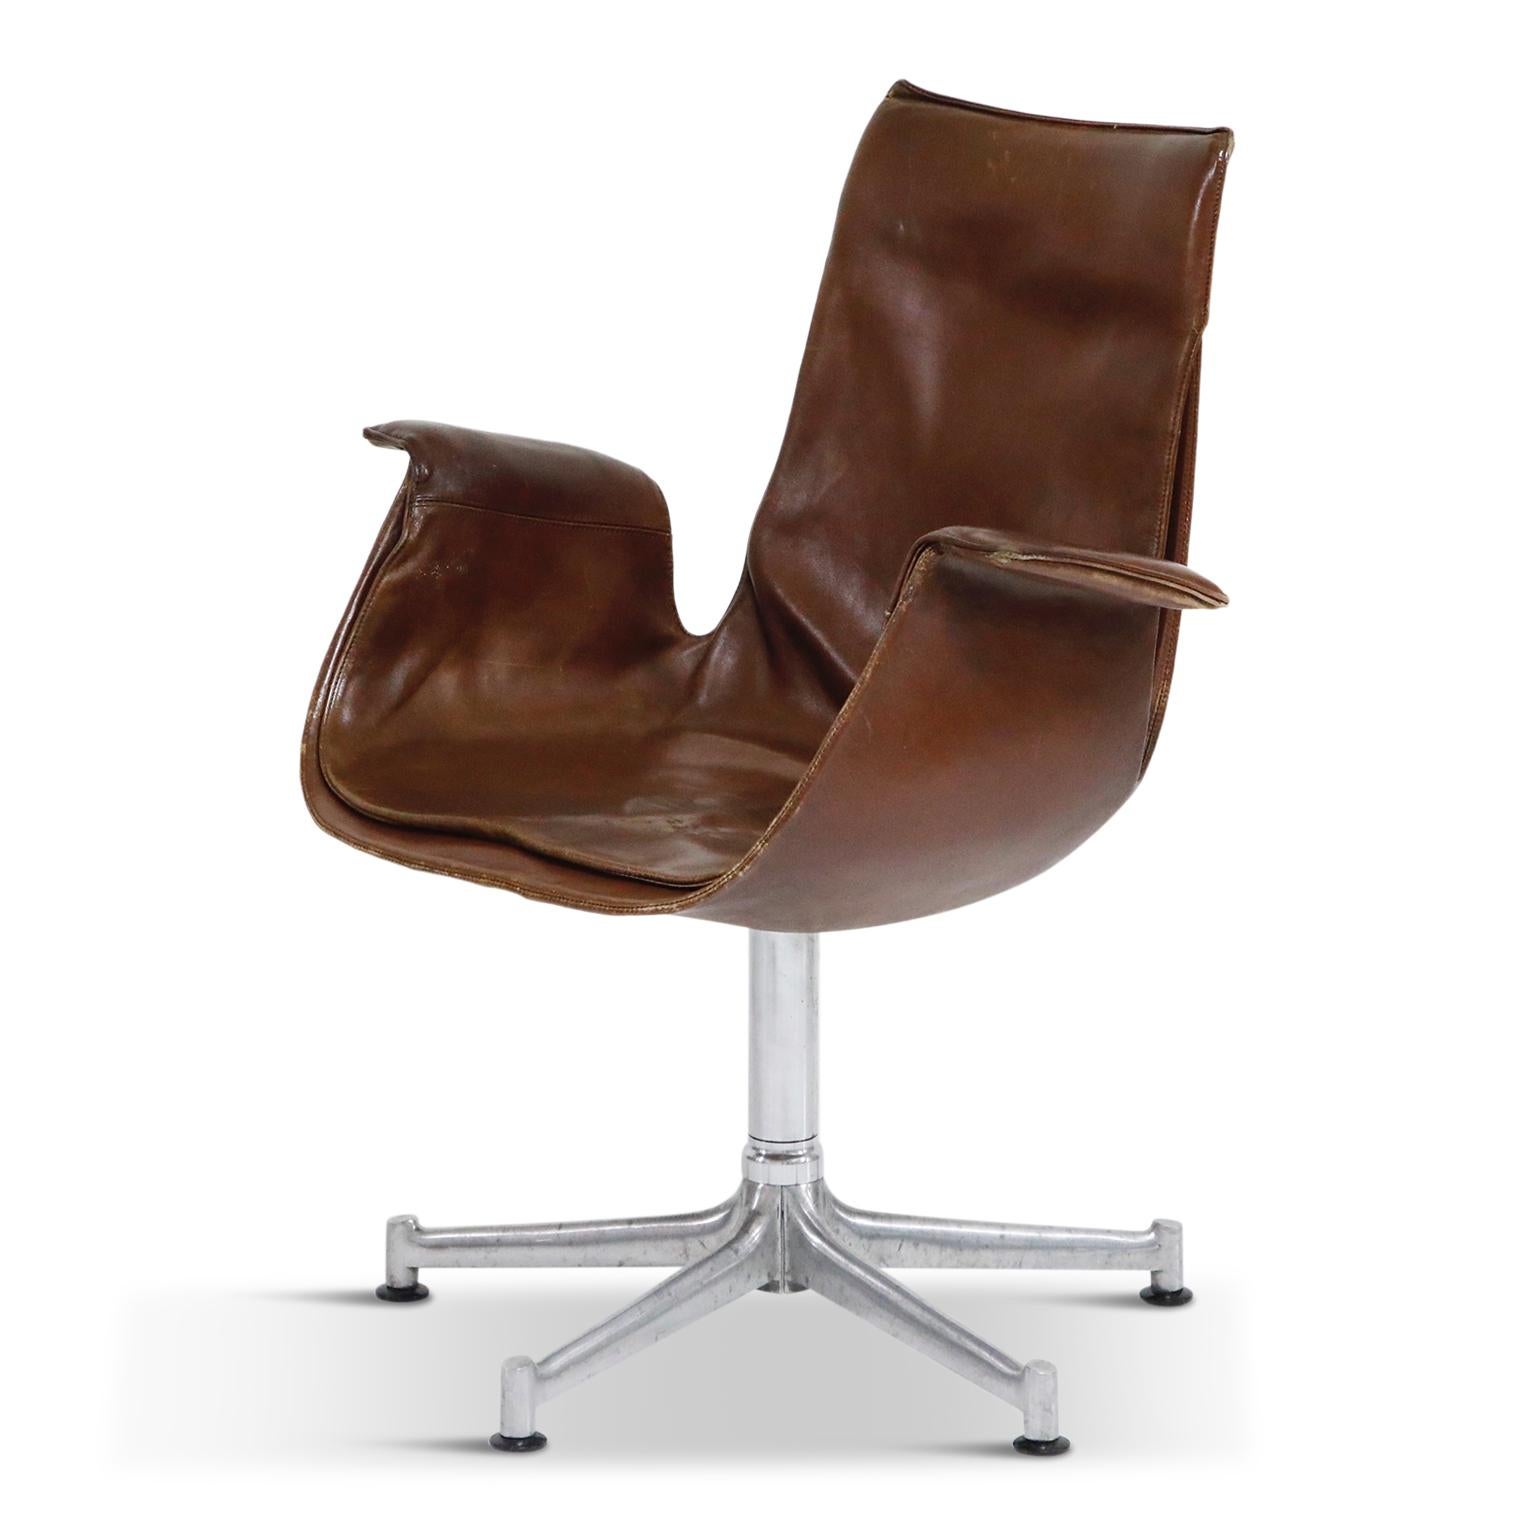 Mid-20th Century Aged Leather Bucket Chair by Preben Fabricius & Jørgen Kastholm for Alfred Kill